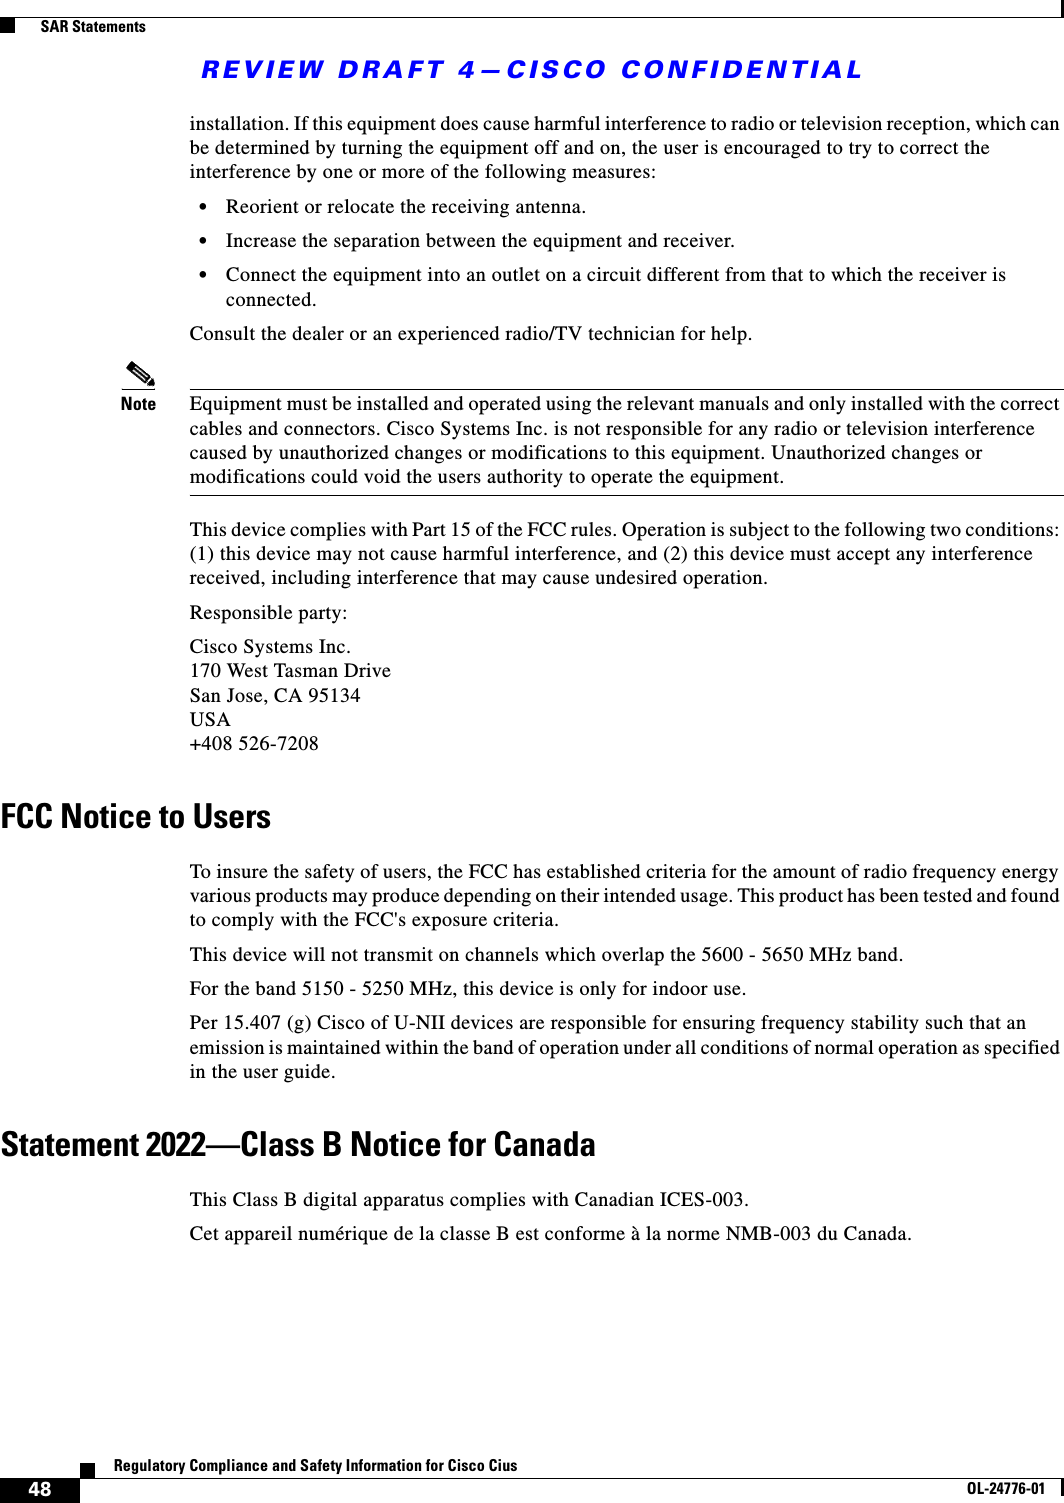 REVIEW DRAFT 4—CISCO CONFIDENTIAL48Regulatory Compliance and Safety Information for Cisco CiusOL-24776-01  SAR Statementsinstallation. If this equipment does cause harmful interference to radio or television reception, which can be determined by turning the equipment off and on, the user is encouraged to try to correct the interference by one or more of the following measures: • Reorient or relocate the receiving antenna.  • Increase the separation between the equipment and receiver.  • Connect the equipment into an outlet on a circuit different from that to which the receiver is connected. Consult the dealer or an experienced radio/TV technician for help.Note Equipment must be installed and operated using the relevant manuals and only installed with the correct cables and connectors. Cisco Systems Inc. is not responsible for any radio or television interference caused by unauthorized changes or modifications to this equipment. Unauthorized changes or modifications could void the users authority to operate the equipment.This device complies with Part 15 of the FCC rules. Operation is subject to the following two conditions: (1) this device may not cause harmful interference, and (2) this device must accept any interference received, including interference that may cause undesired operation.Responsible party:Cisco Systems Inc. 170 West Tasman Drive San Jose, CA 95134 USA +408 526-7208FCC Notice to UsersTo insure the safety of users, the FCC has established criteria for the amount of radio frequency energy various products may produce depending on their intended usage. This product has been tested and found to comply with the FCC&apos;s exposure criteria.This device will not transmit on channels which overlap the 5600 - 5650 MHz band.For the band 5150 - 5250 MHz, this device is only for indoor use.Per 15.407 (g) Cisco of U-NII devices are responsible for ensuring frequency stability such that an emission is maintained within the band of operation under all conditions of normal operation as specified in the user guide.Statement 2022—Class B Notice for CanadaThis Class B digital apparatus complies with Canadian ICES-003.Cet appareil numérique de la classe B est conforme à la norme NMB-003 du Canada.